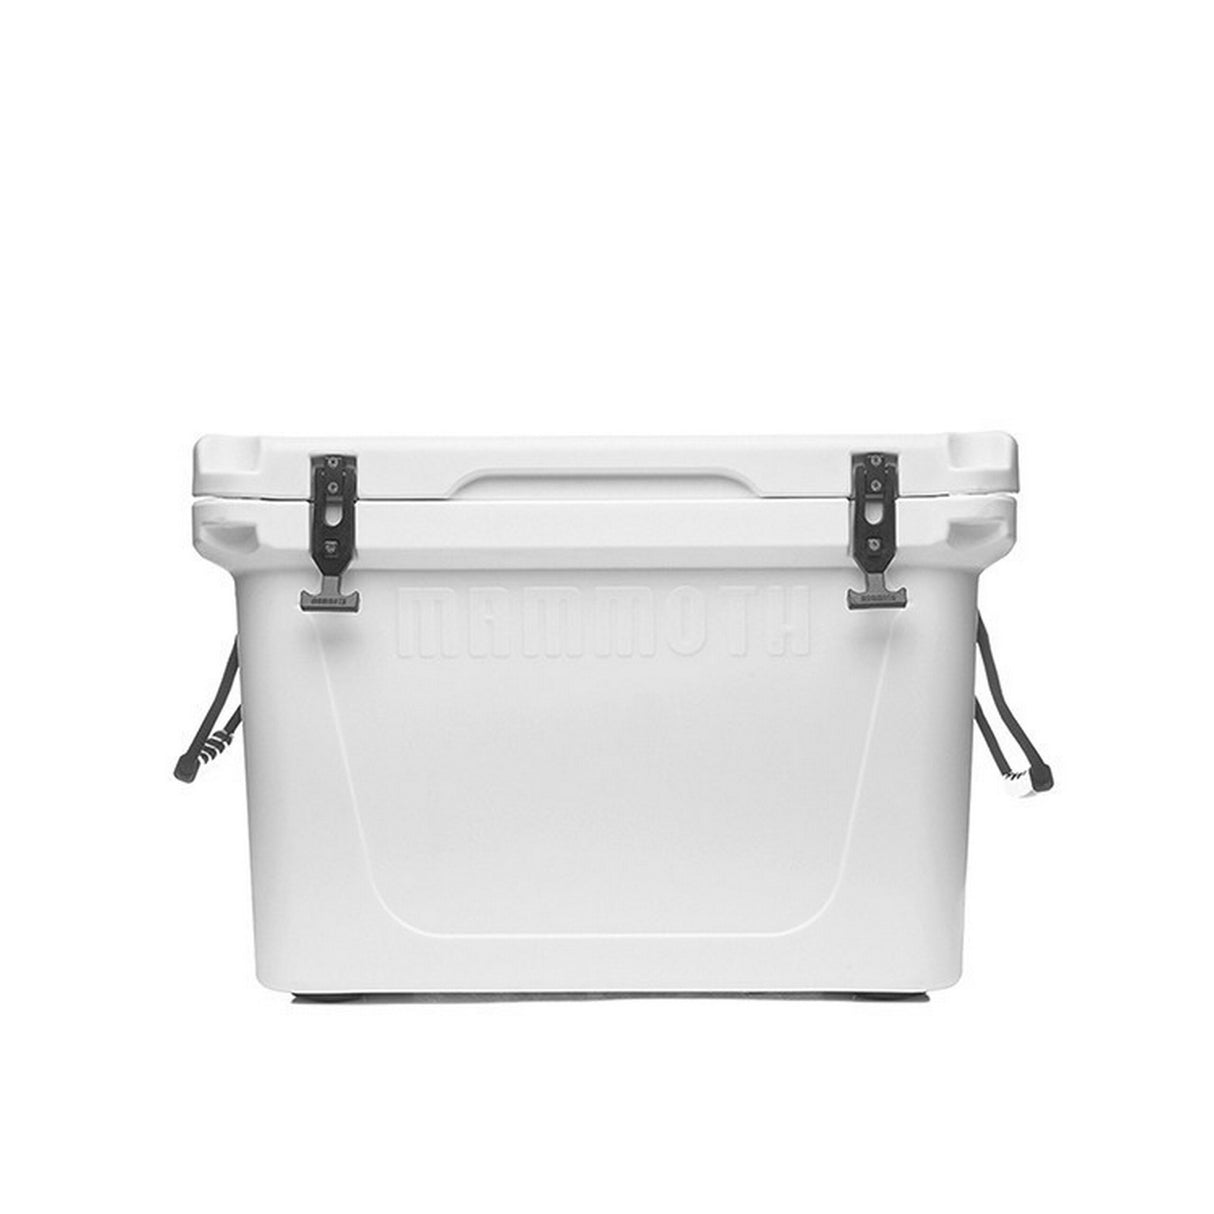 Mammoth Coolers 65 Quart Portable Cooler, White